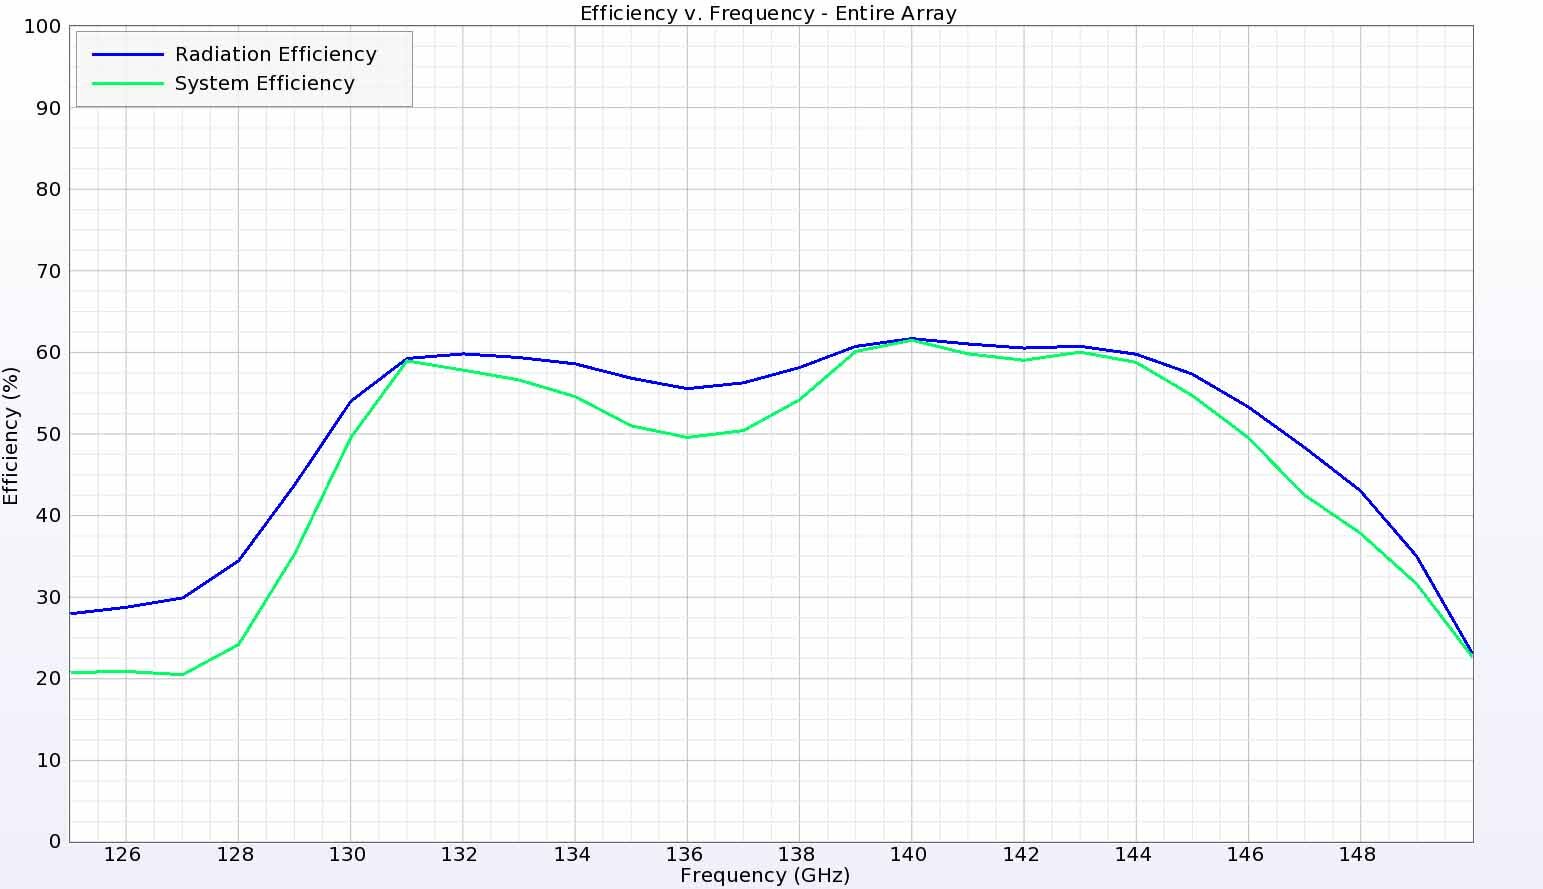 Figure 28:  The efficiency of the antenna array is about 60% over the entire frequency range of interest.